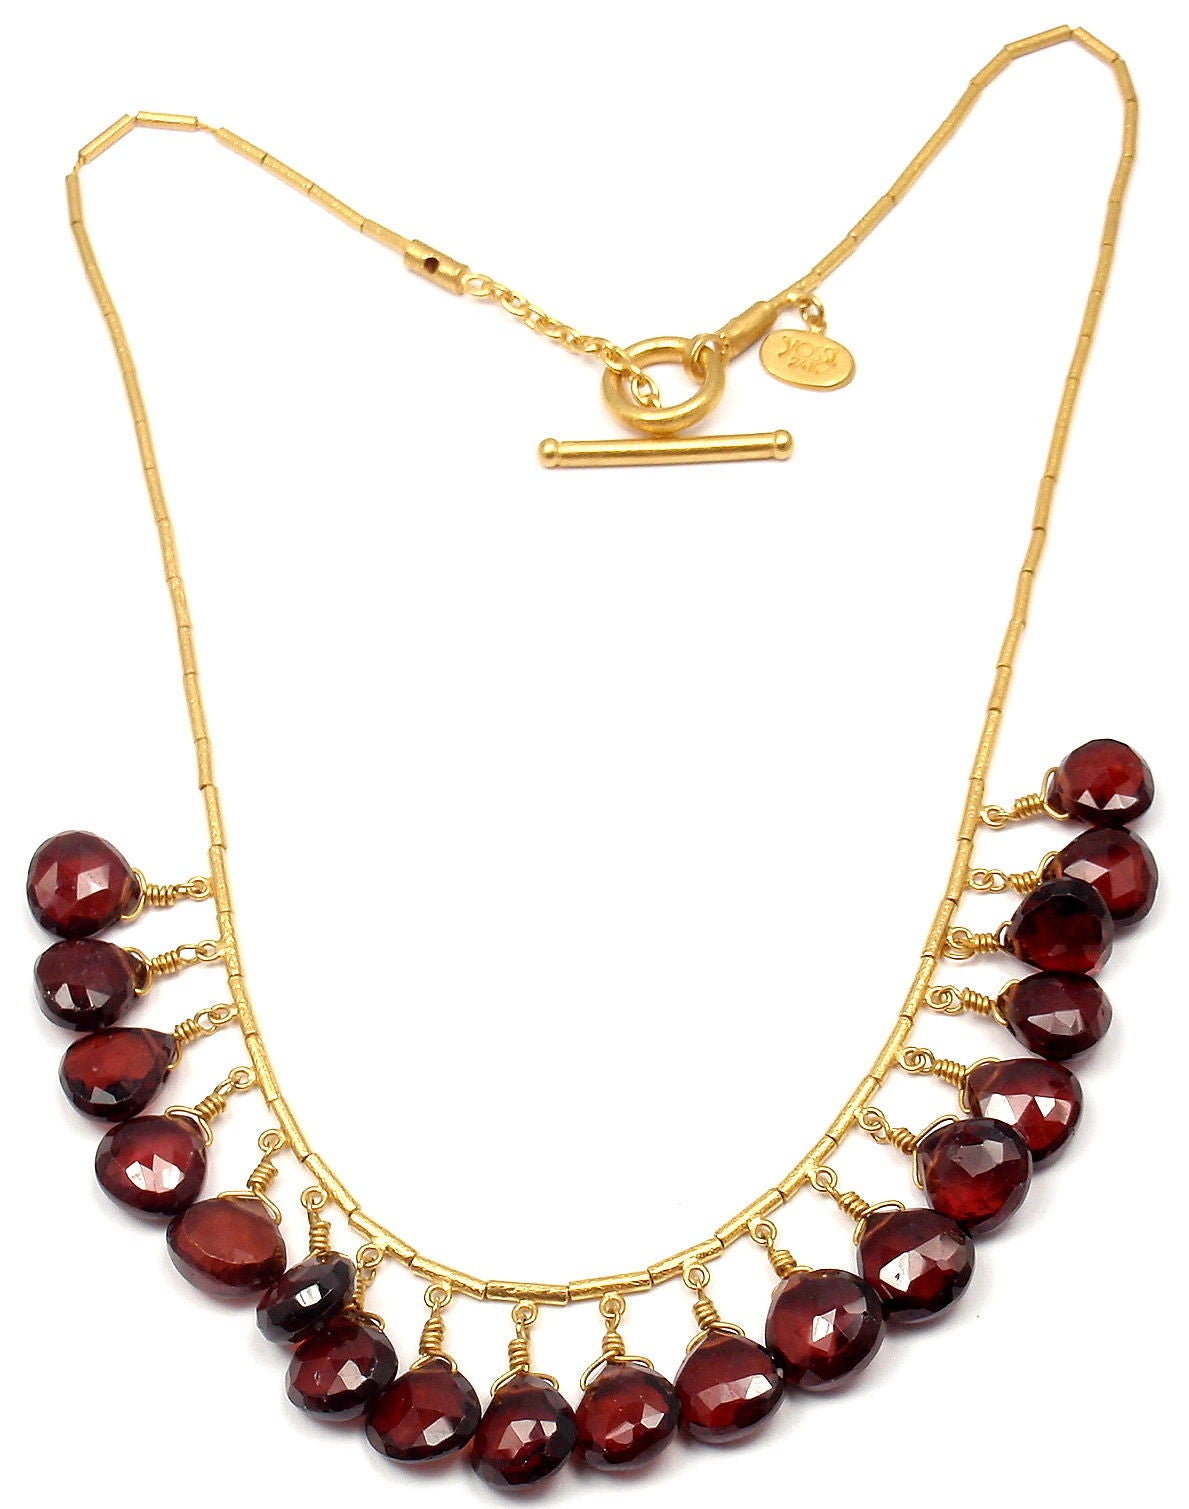 24k Yellow Gold Bamboo Garnet Fringe Necklace by Yossi Harari.
With 19 garnets 10mm each
Details:
Length: 16